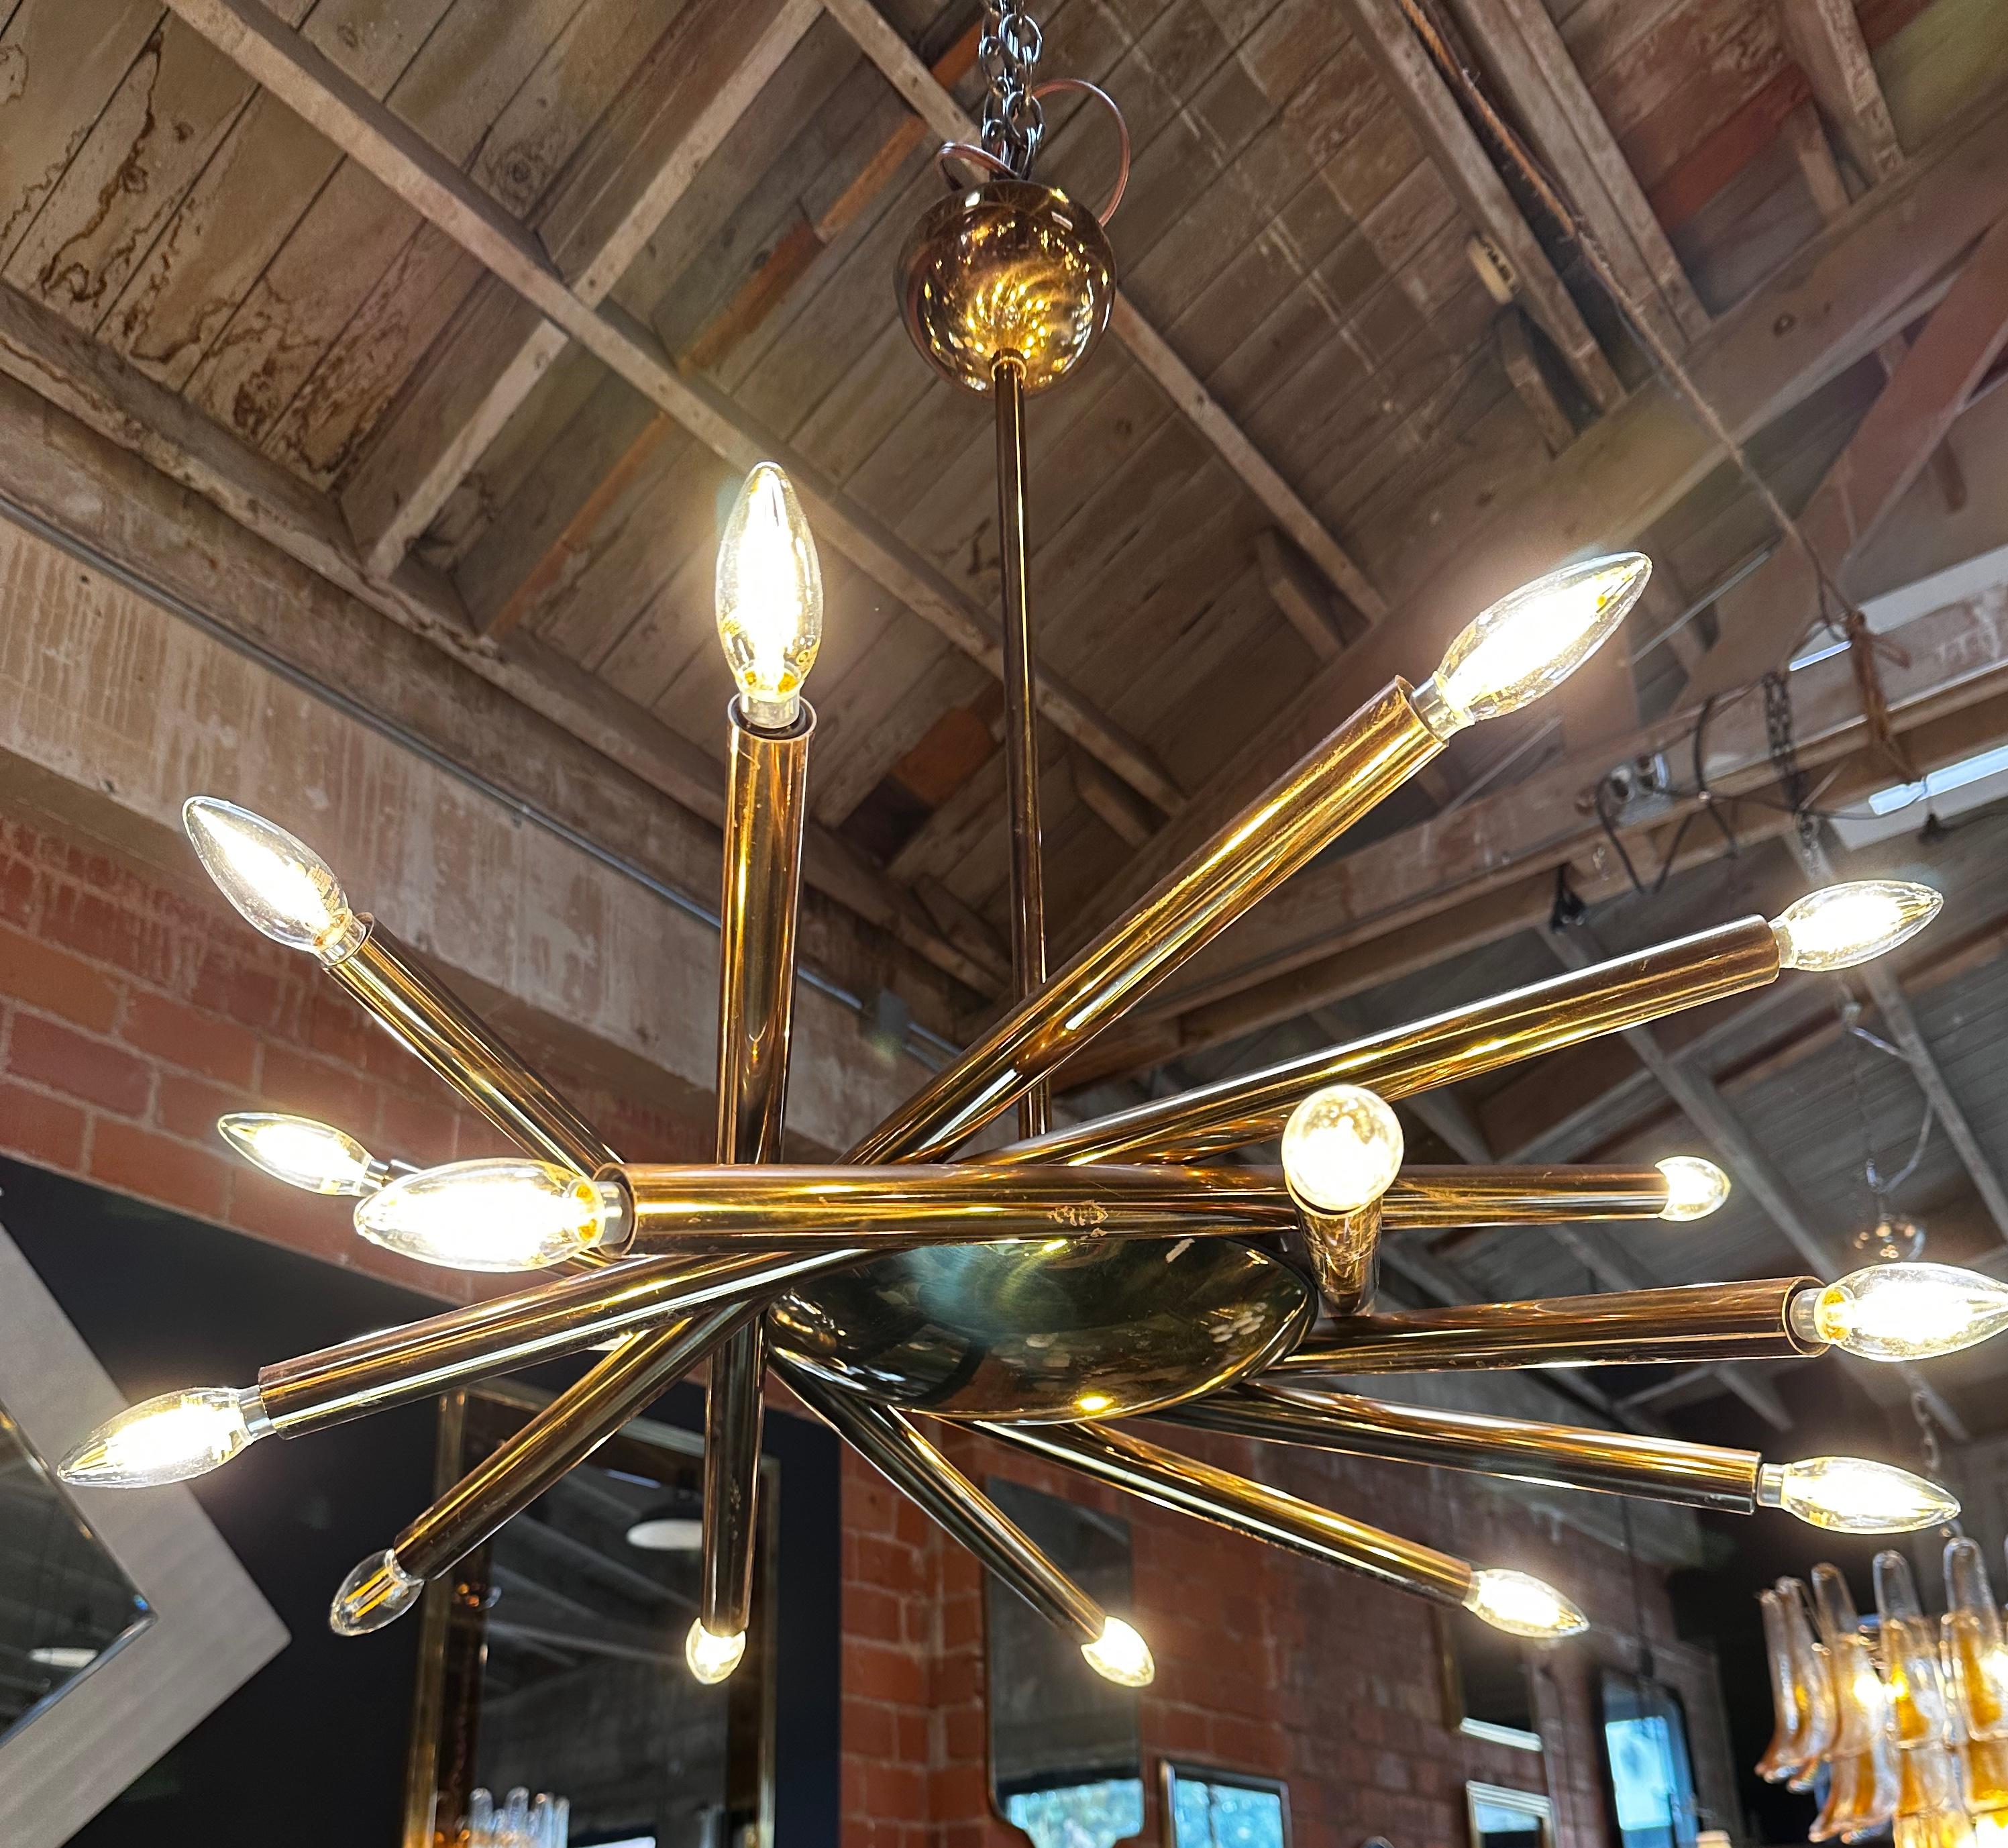 The Mid Century Italian Stilnovo Orbit Chandelier, crafted in brass and originating from Italy in 1955, is a stunning example of mid-century modern design. This remarkable chandelier is an embodiment of elegance and sophistication, featuring a host